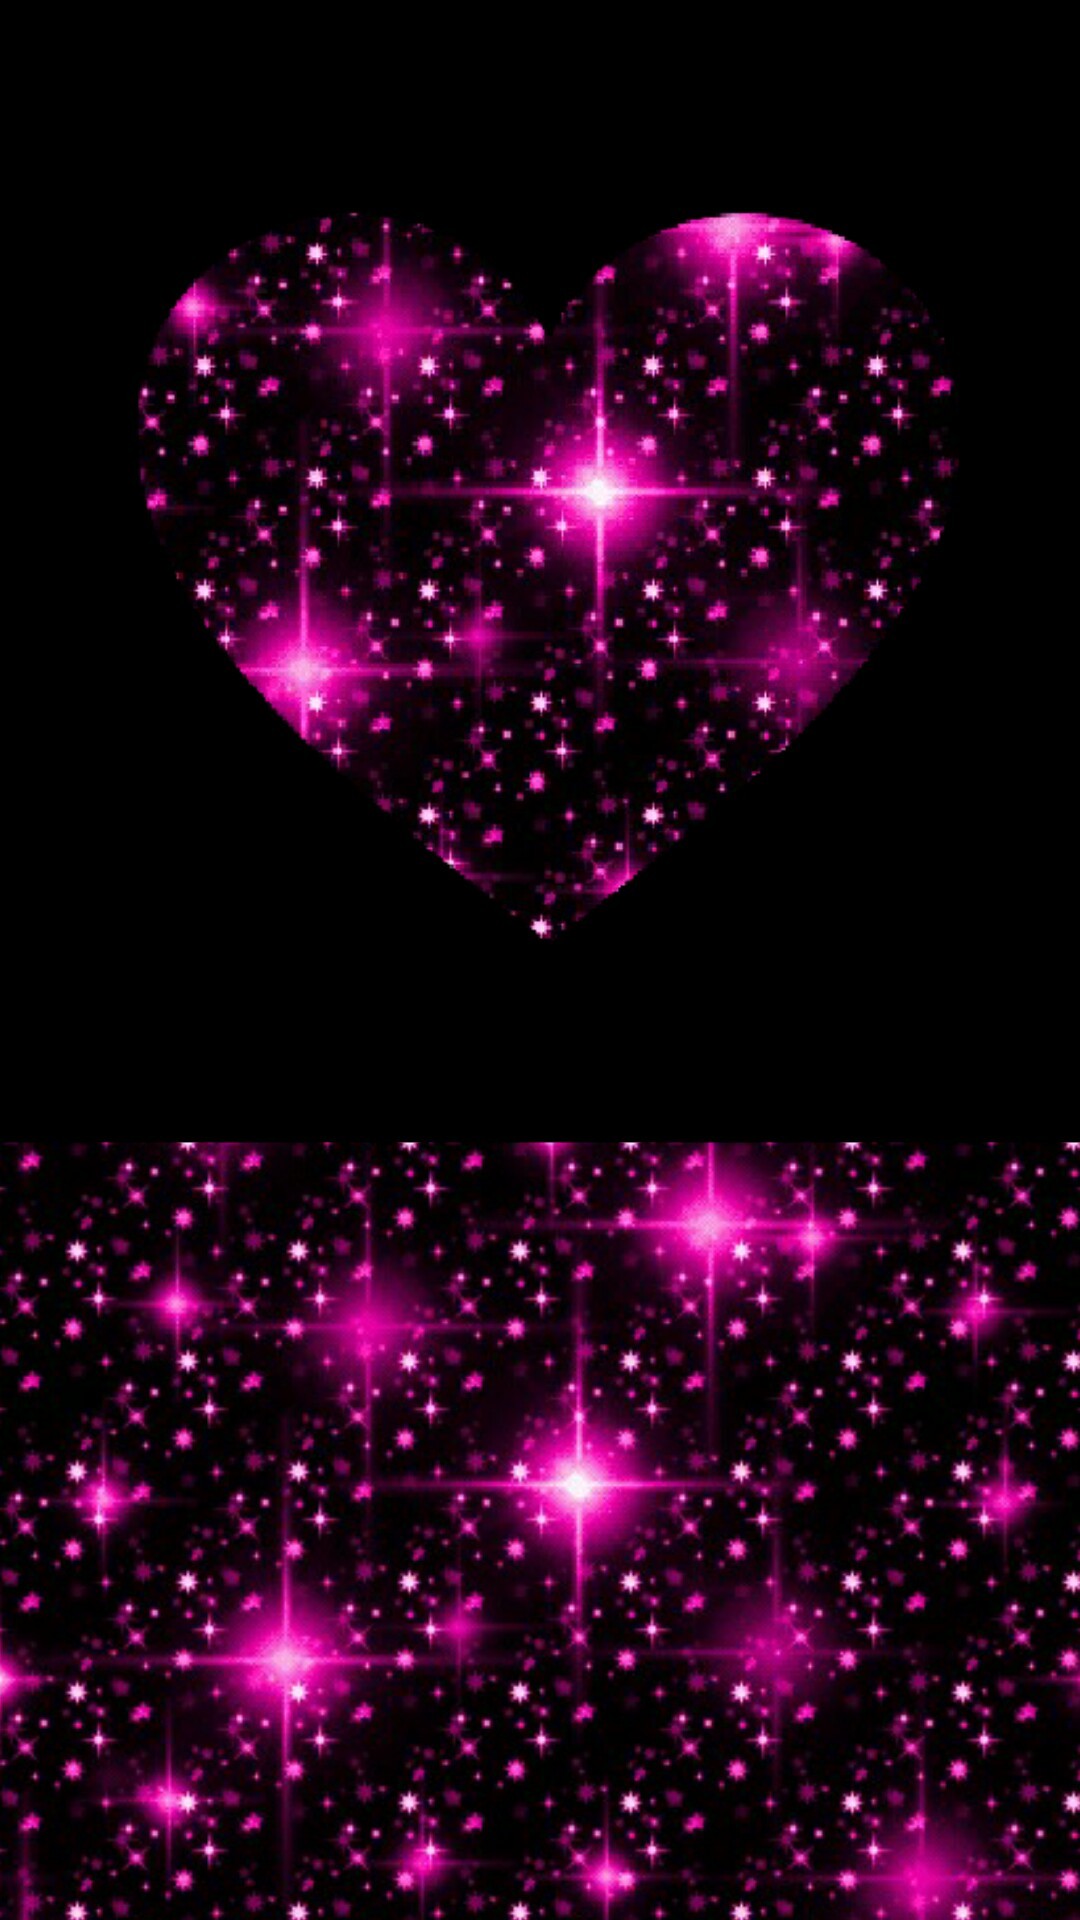 1080x1920 Wallpaper backgrounds Â· Black and pink